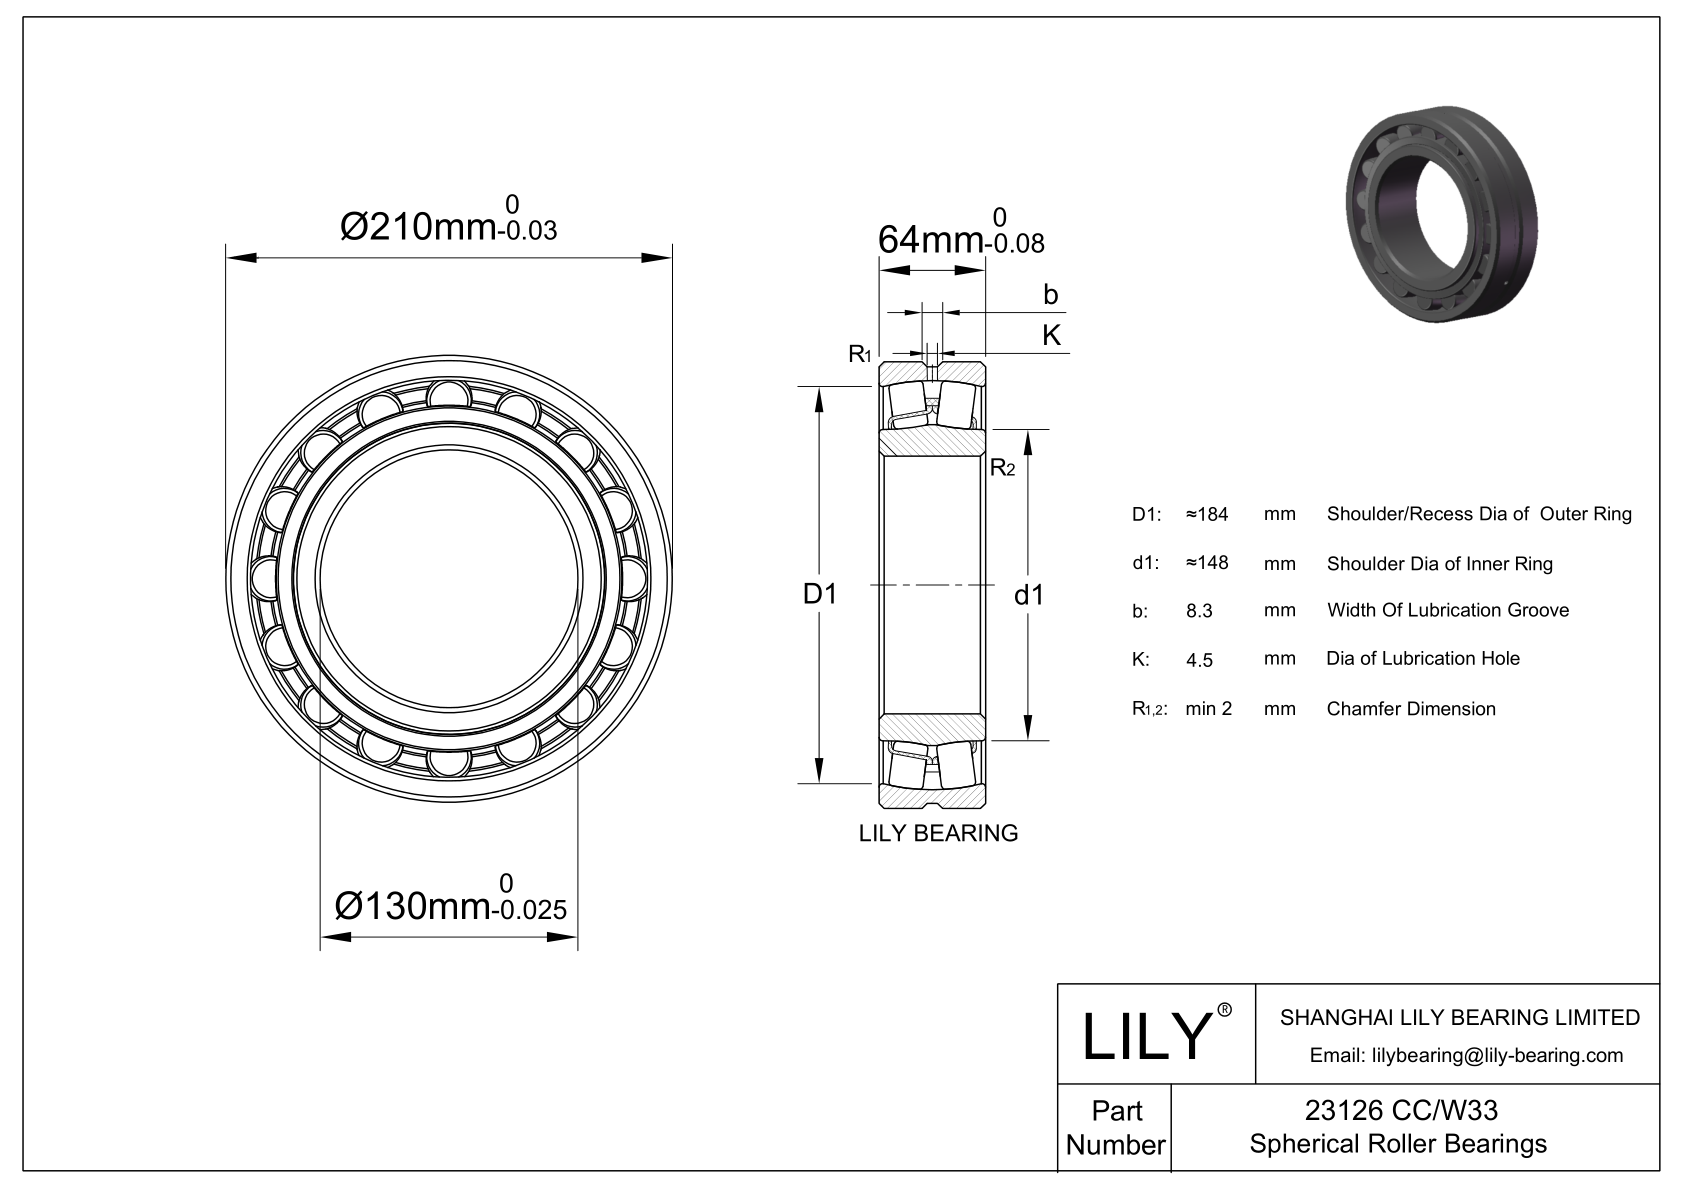 23126 CC/W33 Double Row Spherical Roller Bearing cad drawing